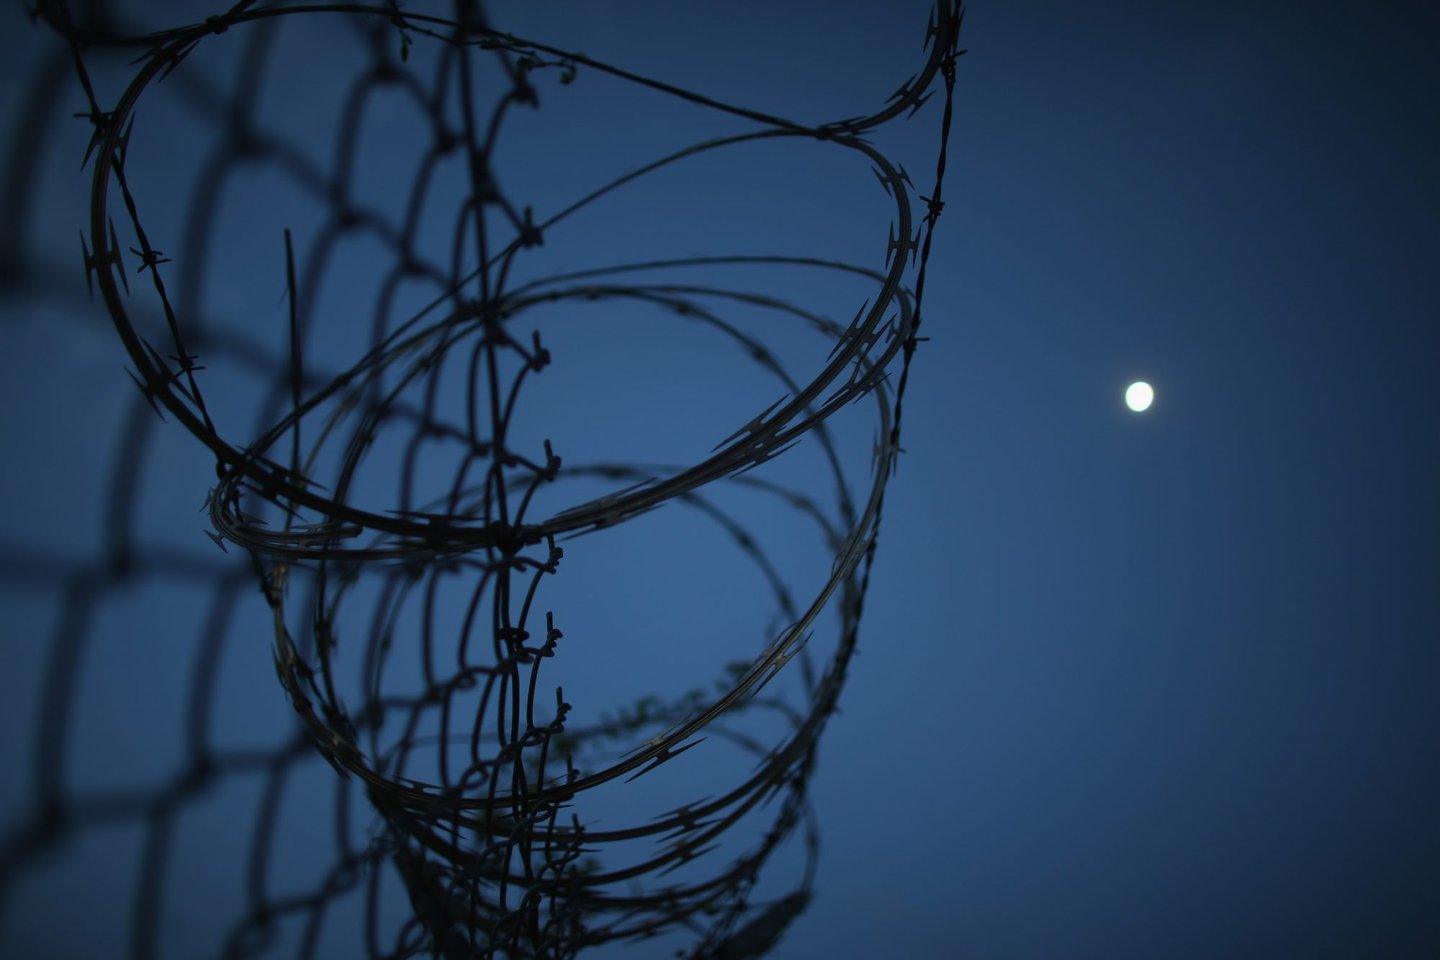 GUANTANAMO BAY, CUBA - JUNE 27: (EDITORS NOTE: Image has been reviewed by the U.S. Military prior to transmission.) Razor wire is seen on the fence around the currently closed Camp X-Ray which was the first detention facility to hold 'enemy combatants' at the U.S. Naval Station on June 27, 2013 in Guantanamo Bay, Cuba.The U.S. Naval Station at Guantanamo Bay, houses the American detention center for 'enemy combatants'. President Barack Obama has recently spoken again about closing the prison which has been used to hold prisoners from the invasion of Afghanistan and the war on terror since early 2002. (Photo by Joe Raedle/Getty Images)